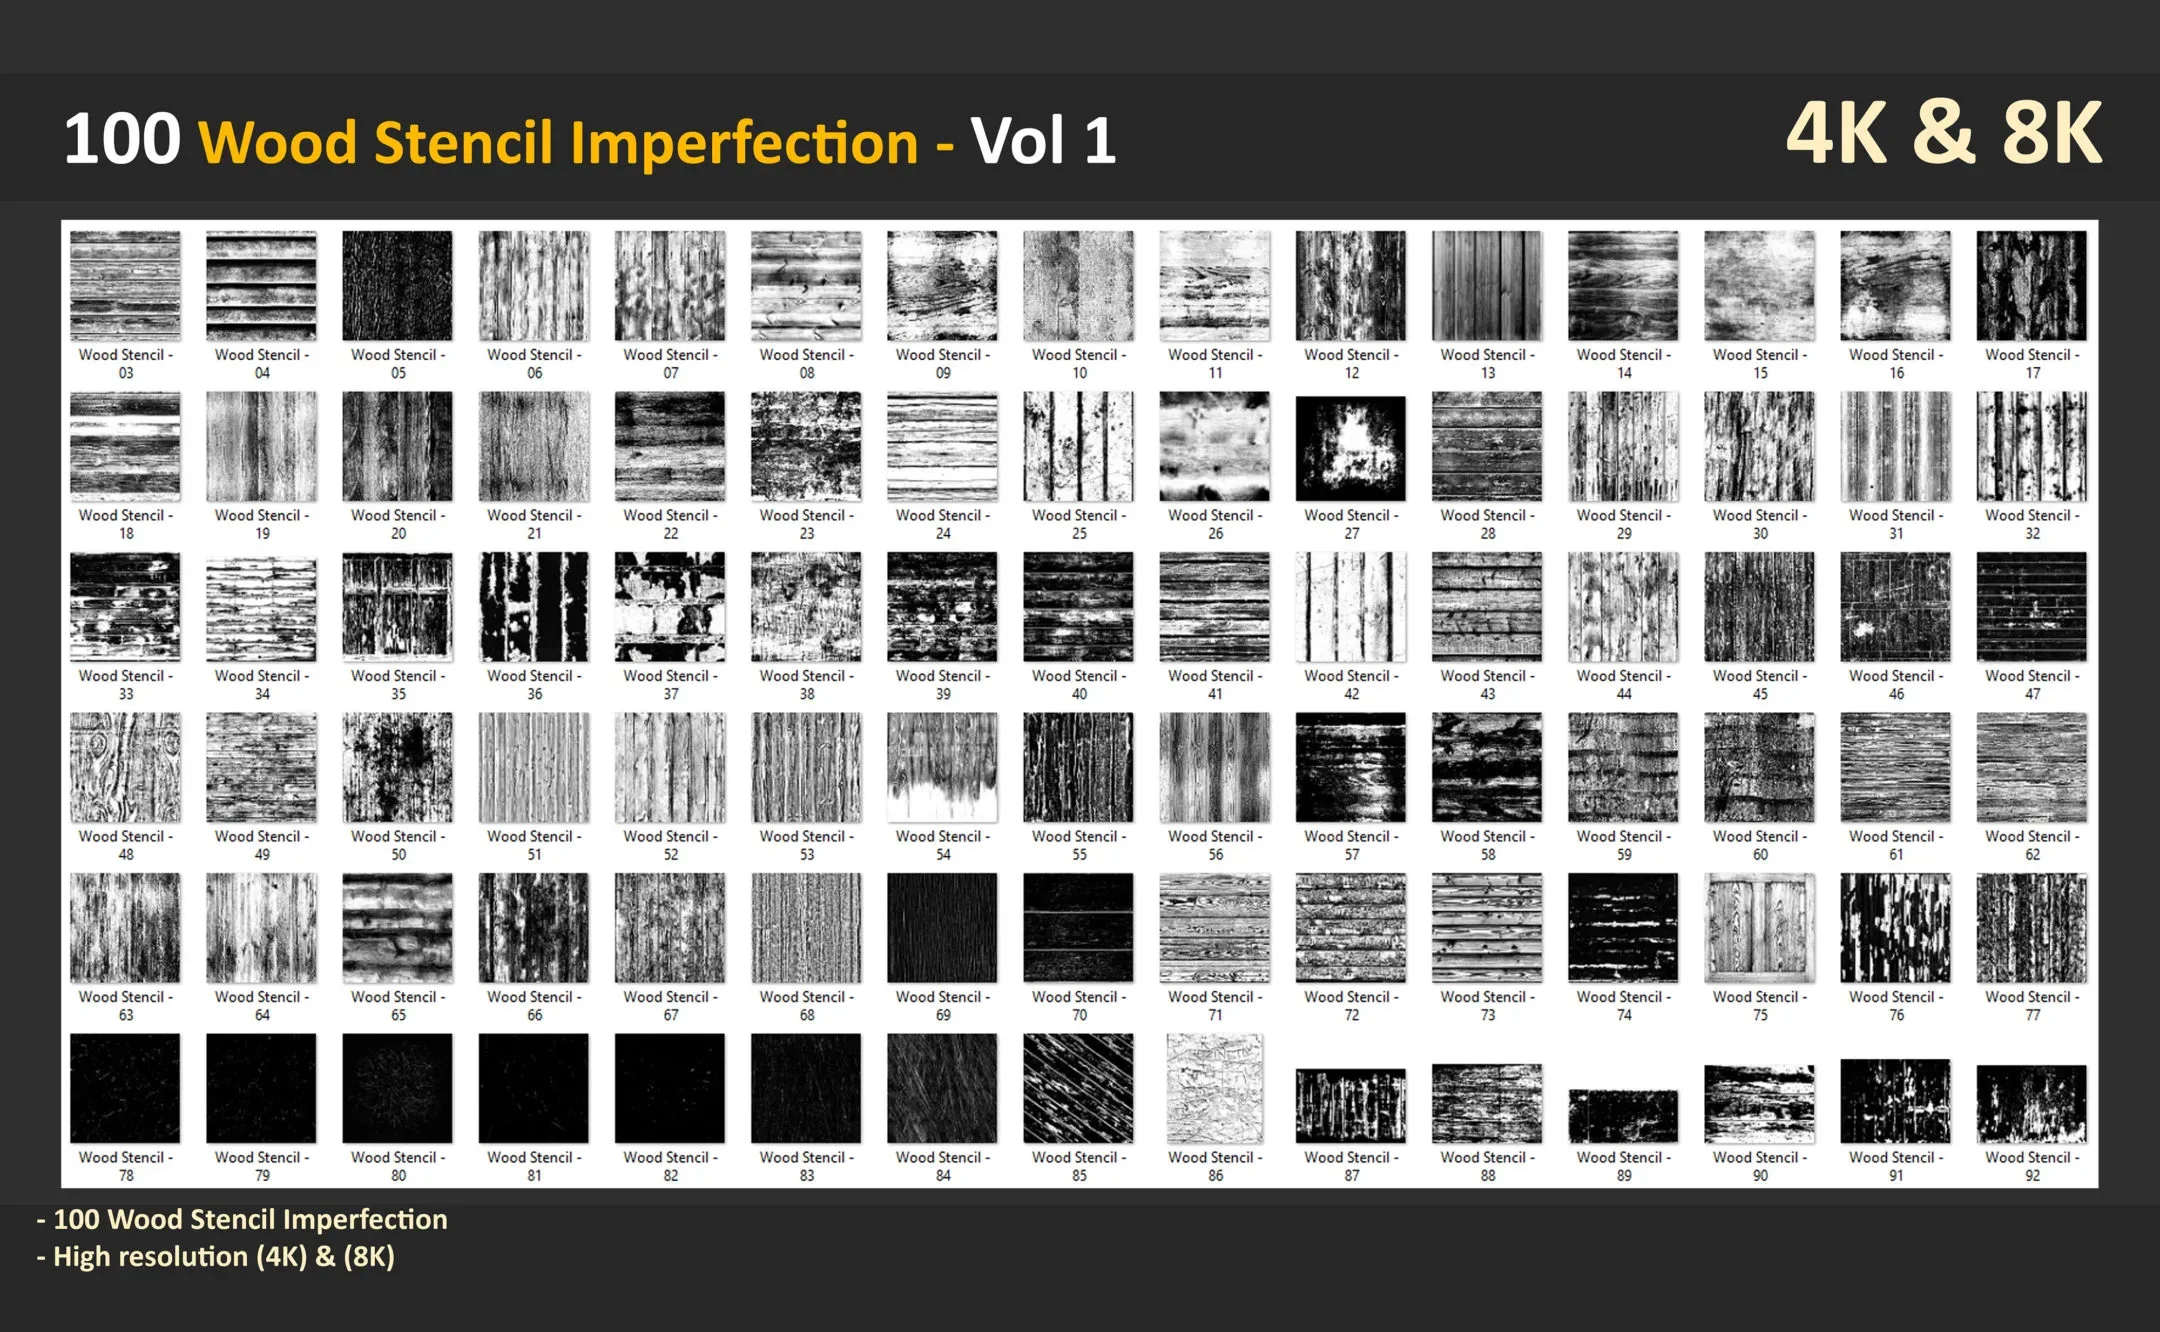 100 Wood Stencil Imperfection - Vol 1